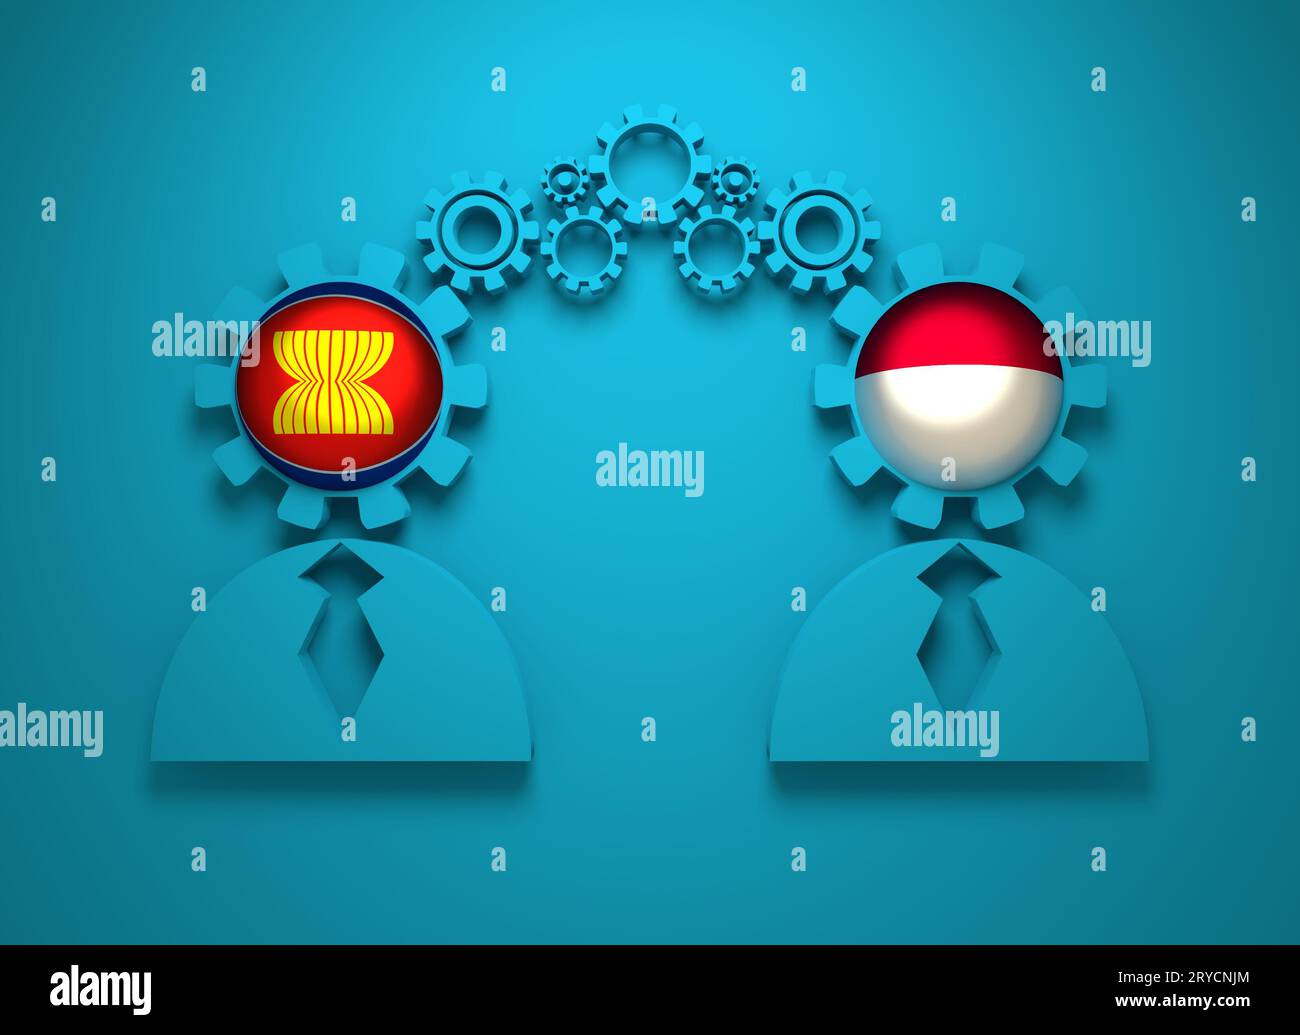 Politic and economic relationship between ASEAN and Indonesia Stock Photo